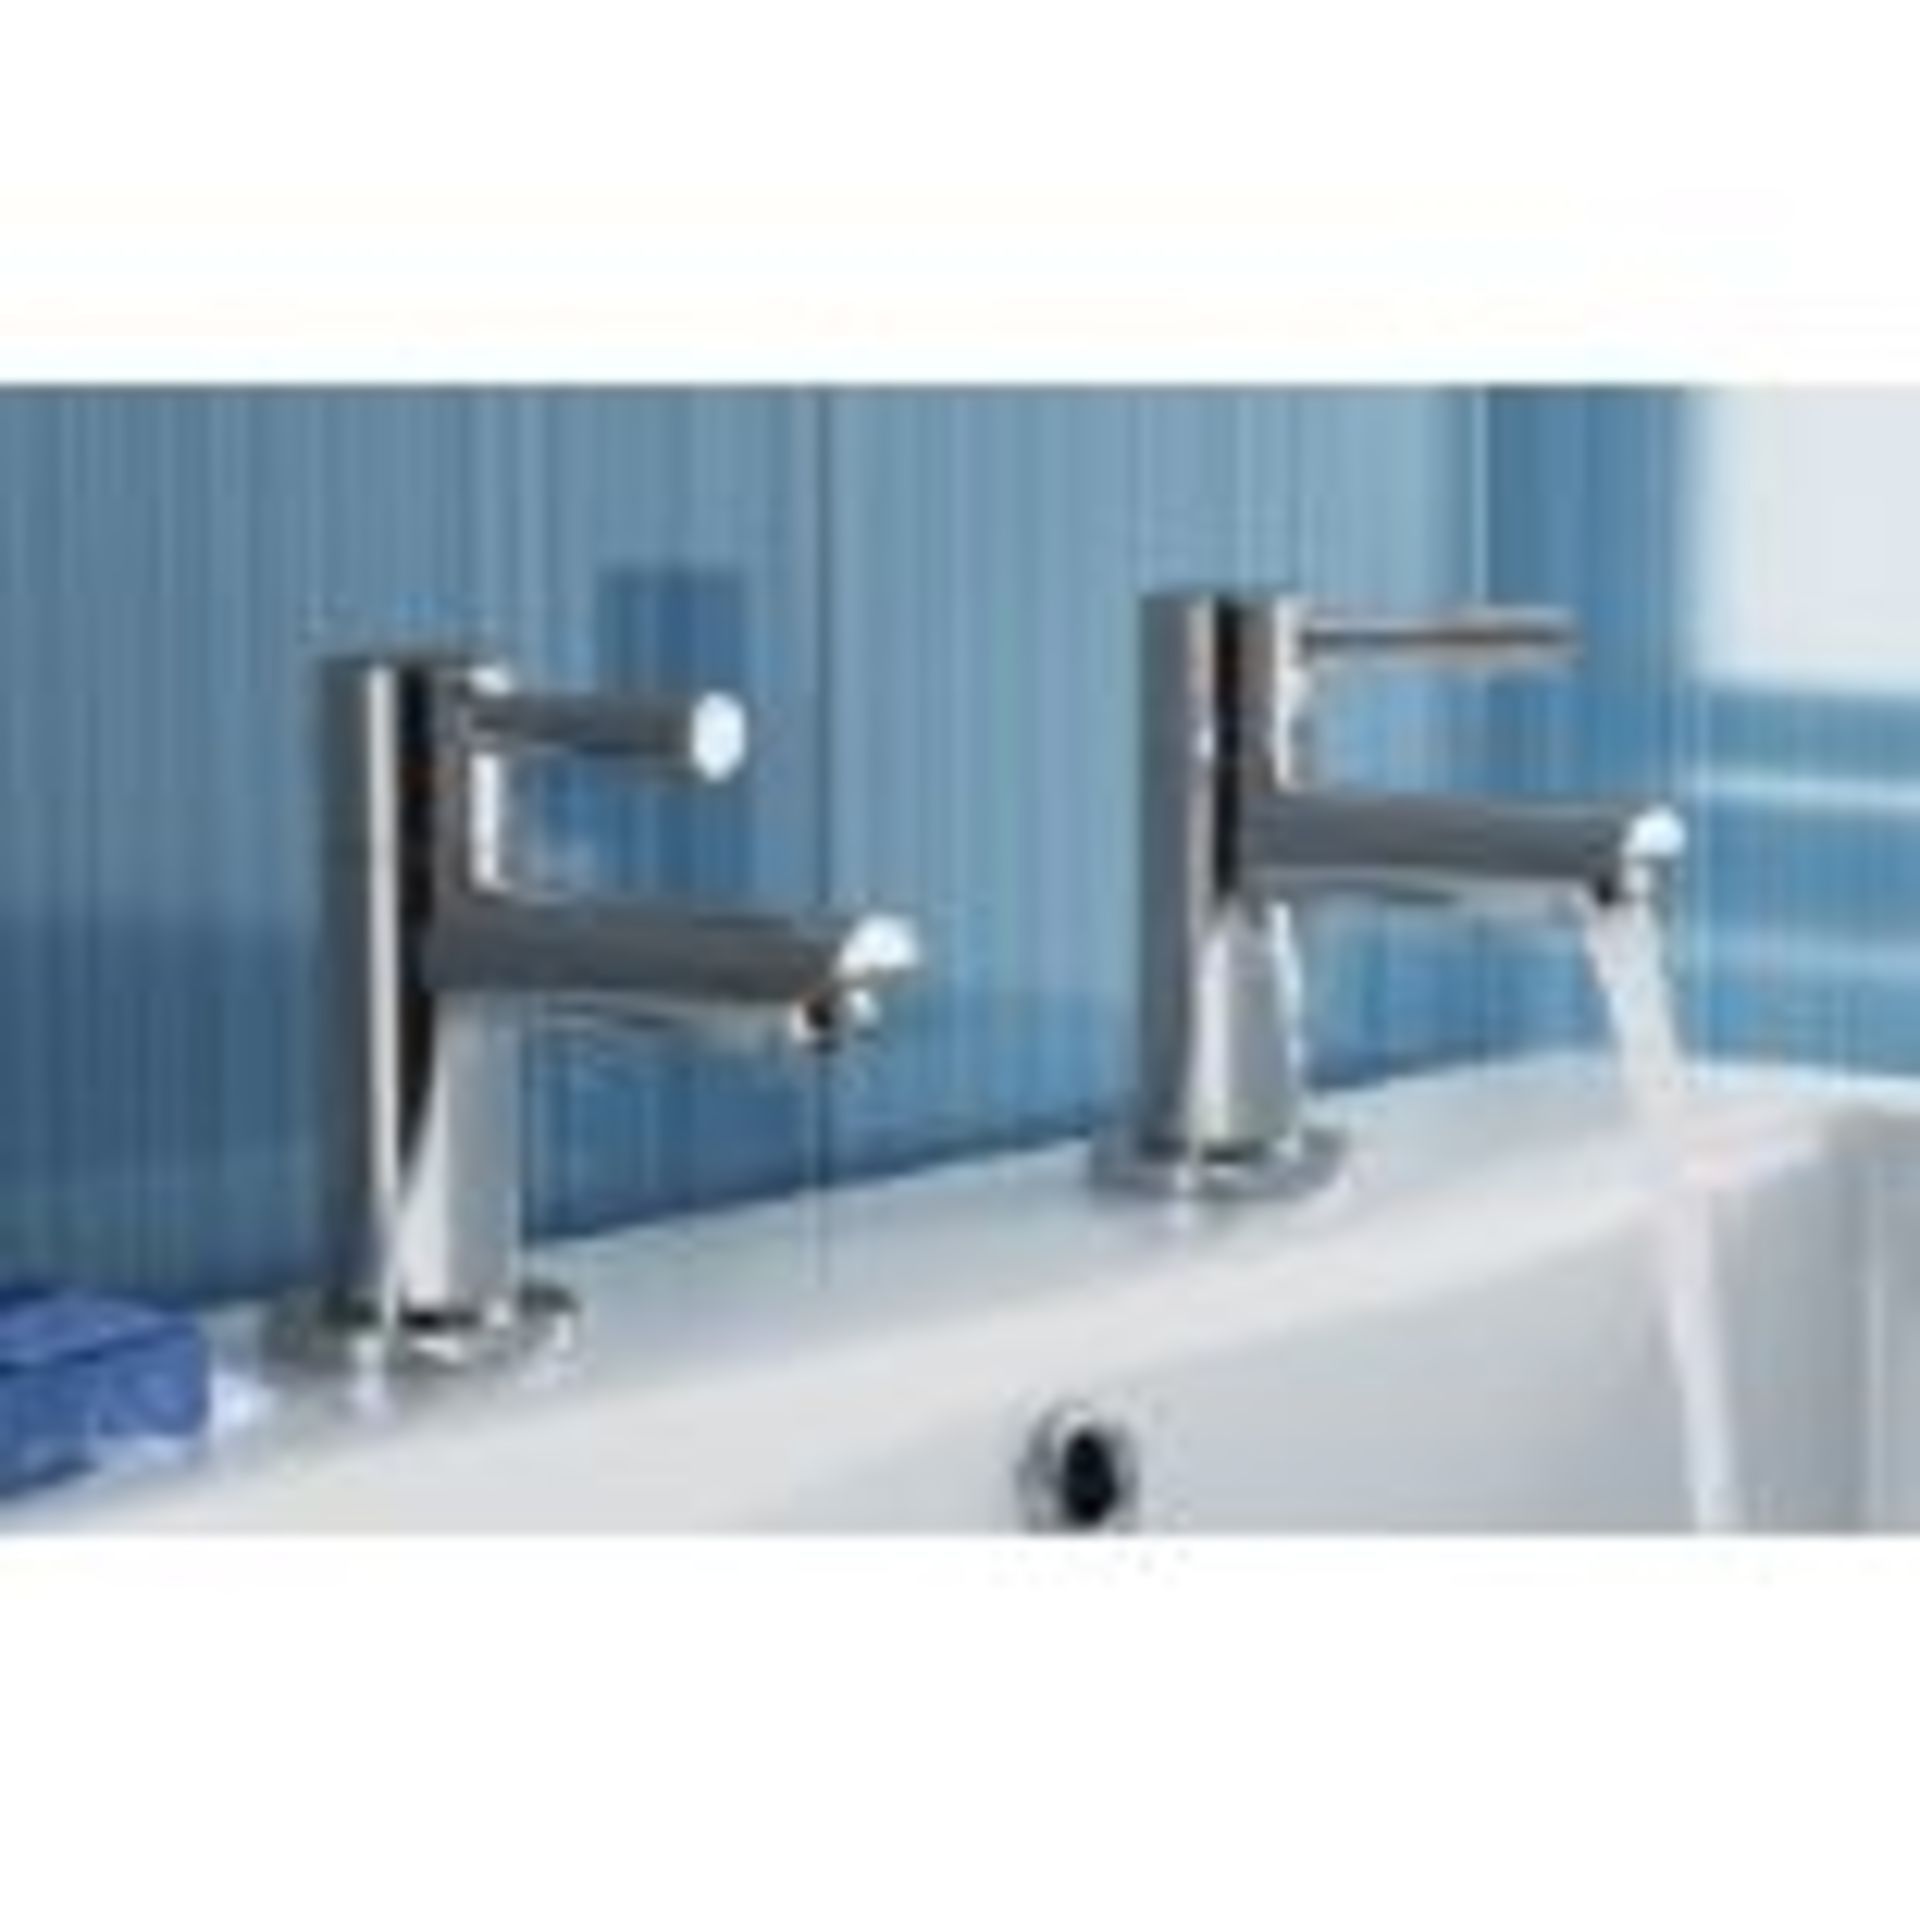 New & Boxed Gladstone Taps. Tb2013.Chrome Plated Solid Brass Mirror Finish Simple Installation ... - Image 2 of 2